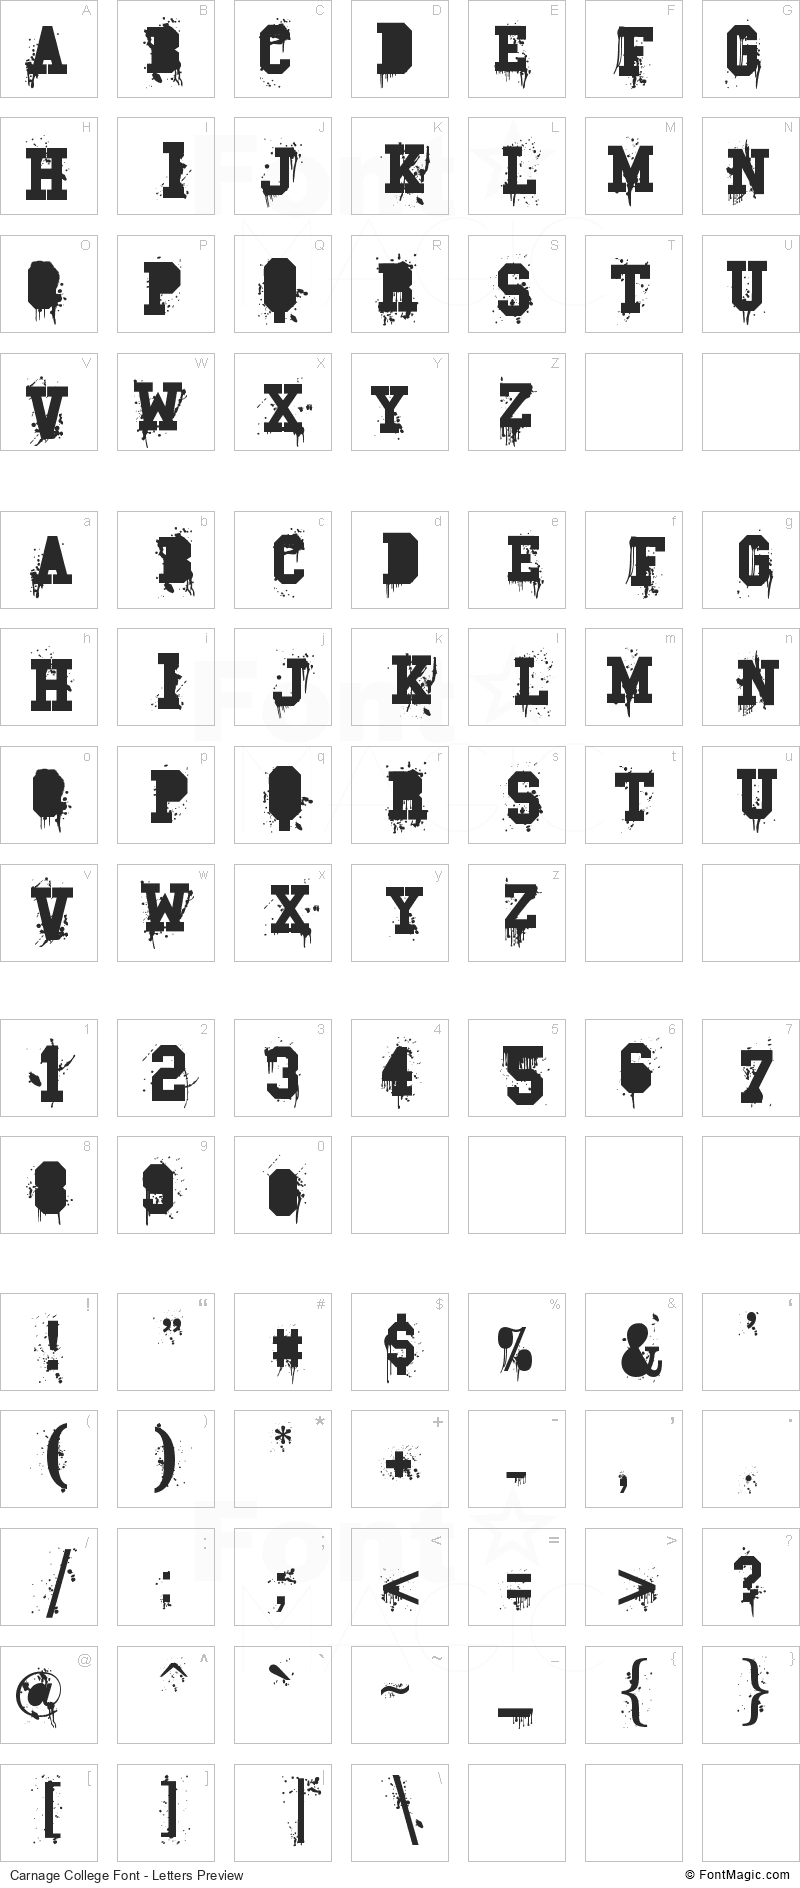 Carnage College Font - All Latters Preview Chart